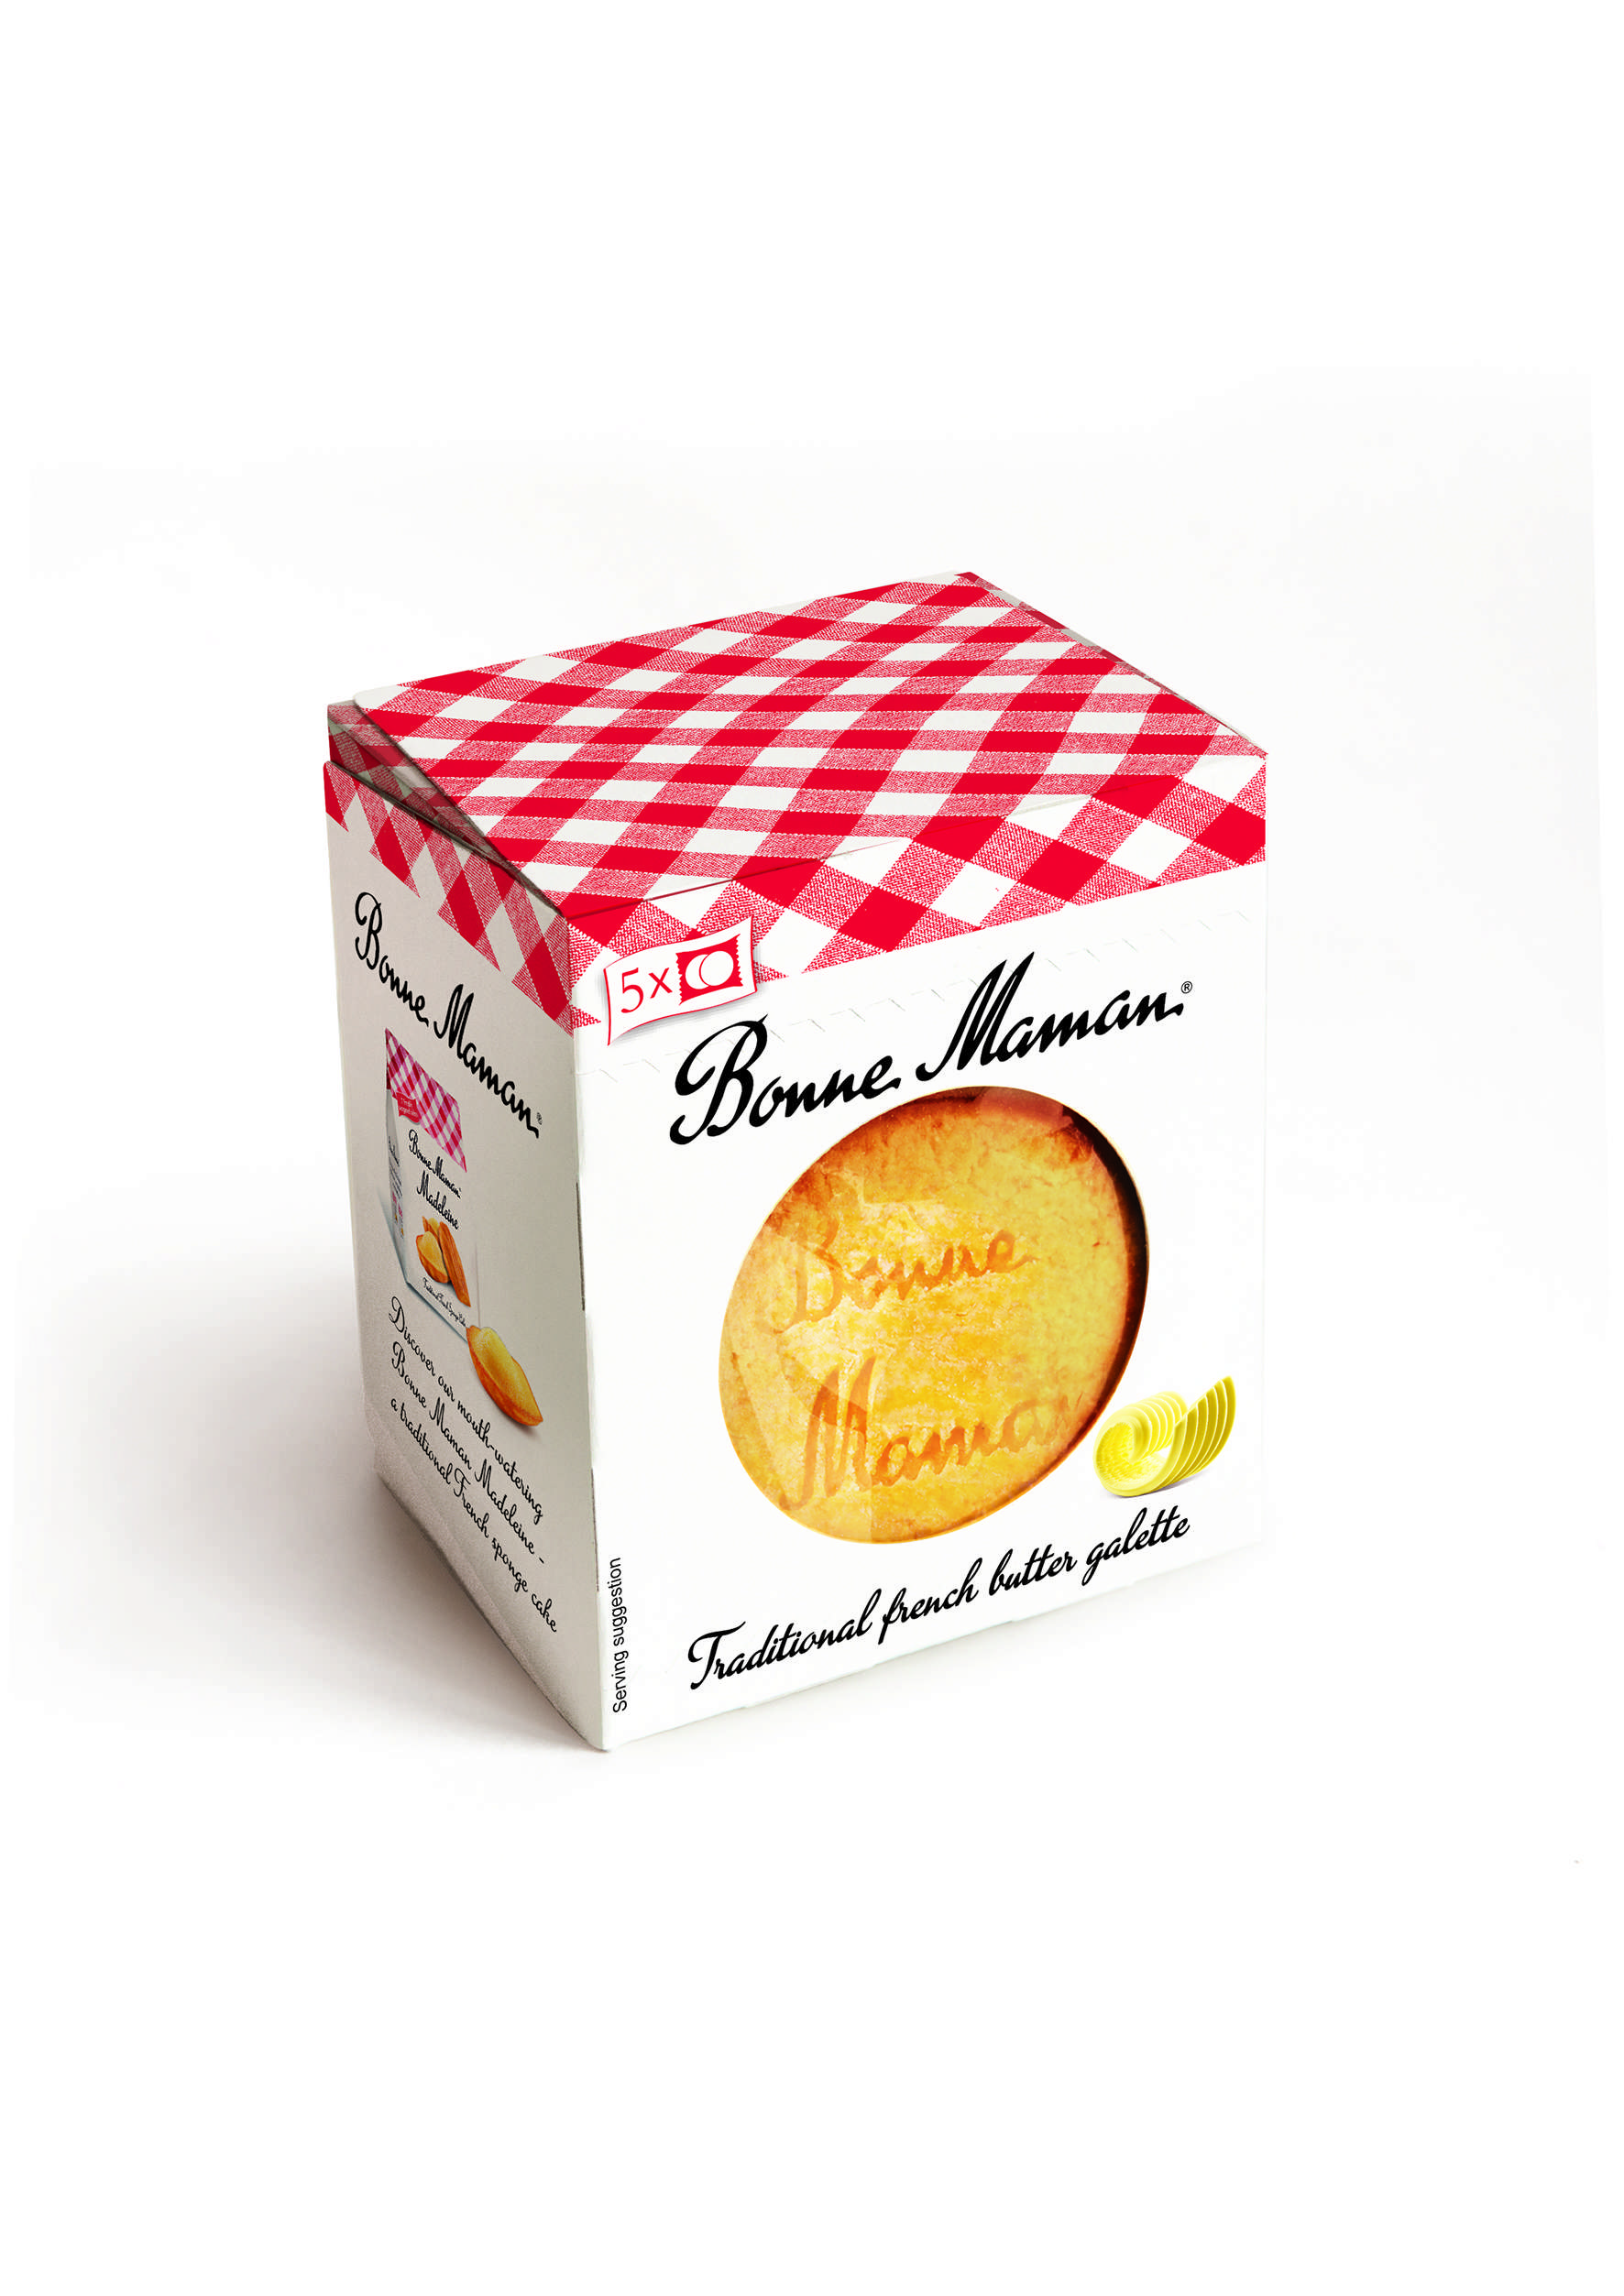 Bonne Maman Traditional French butter galette 140g